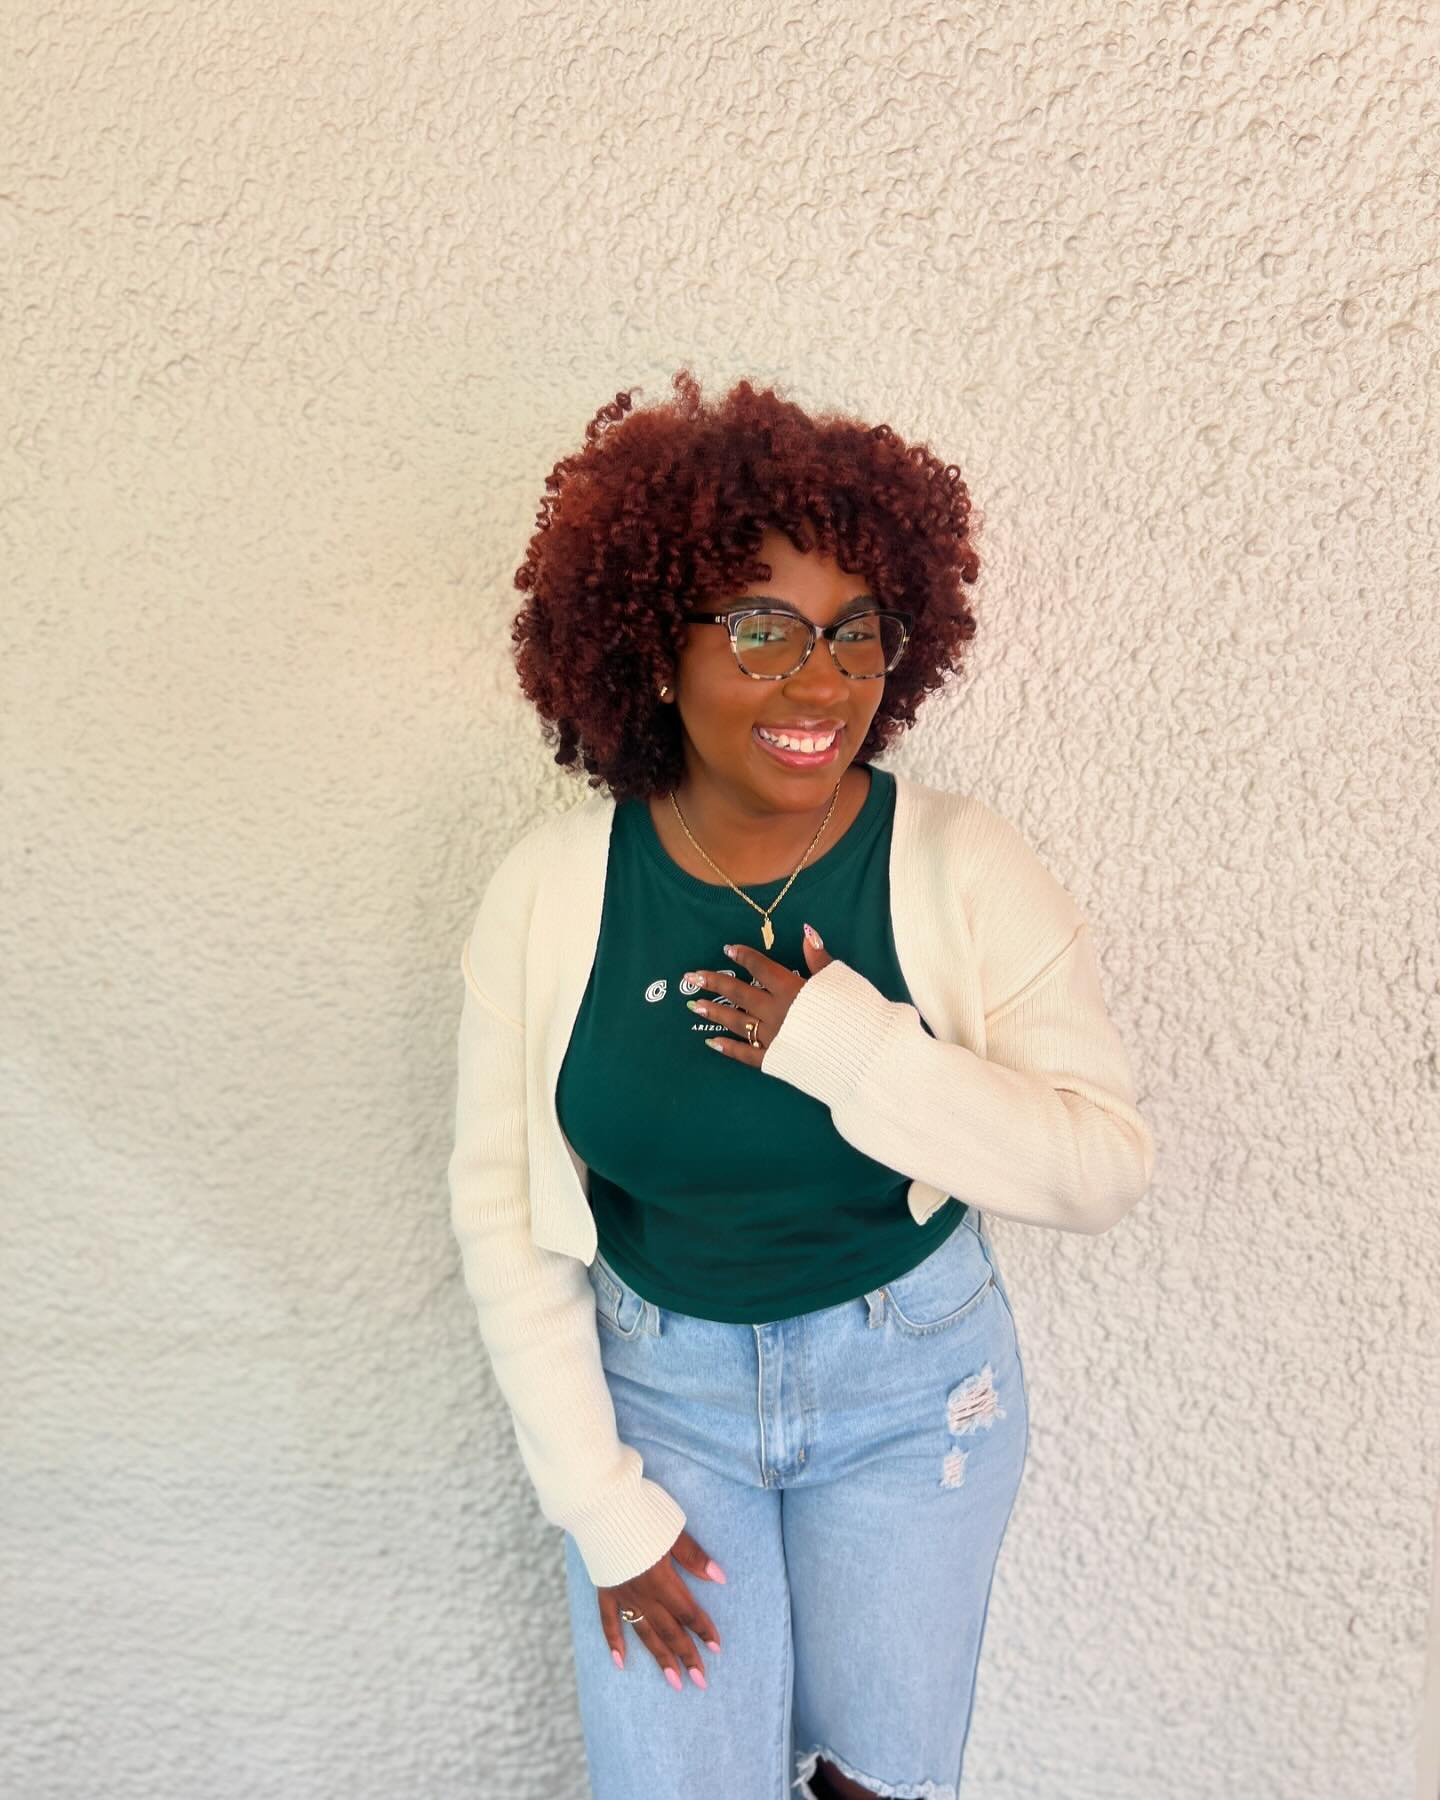 Meet Jasmin! She&rsquo;s one of the incredible leaders serving in the children&rsquo;s ministry. Jasmin has been coming to City Lift Church since it was first established! As a future child therapist, she knows how to resonate with each child by maki